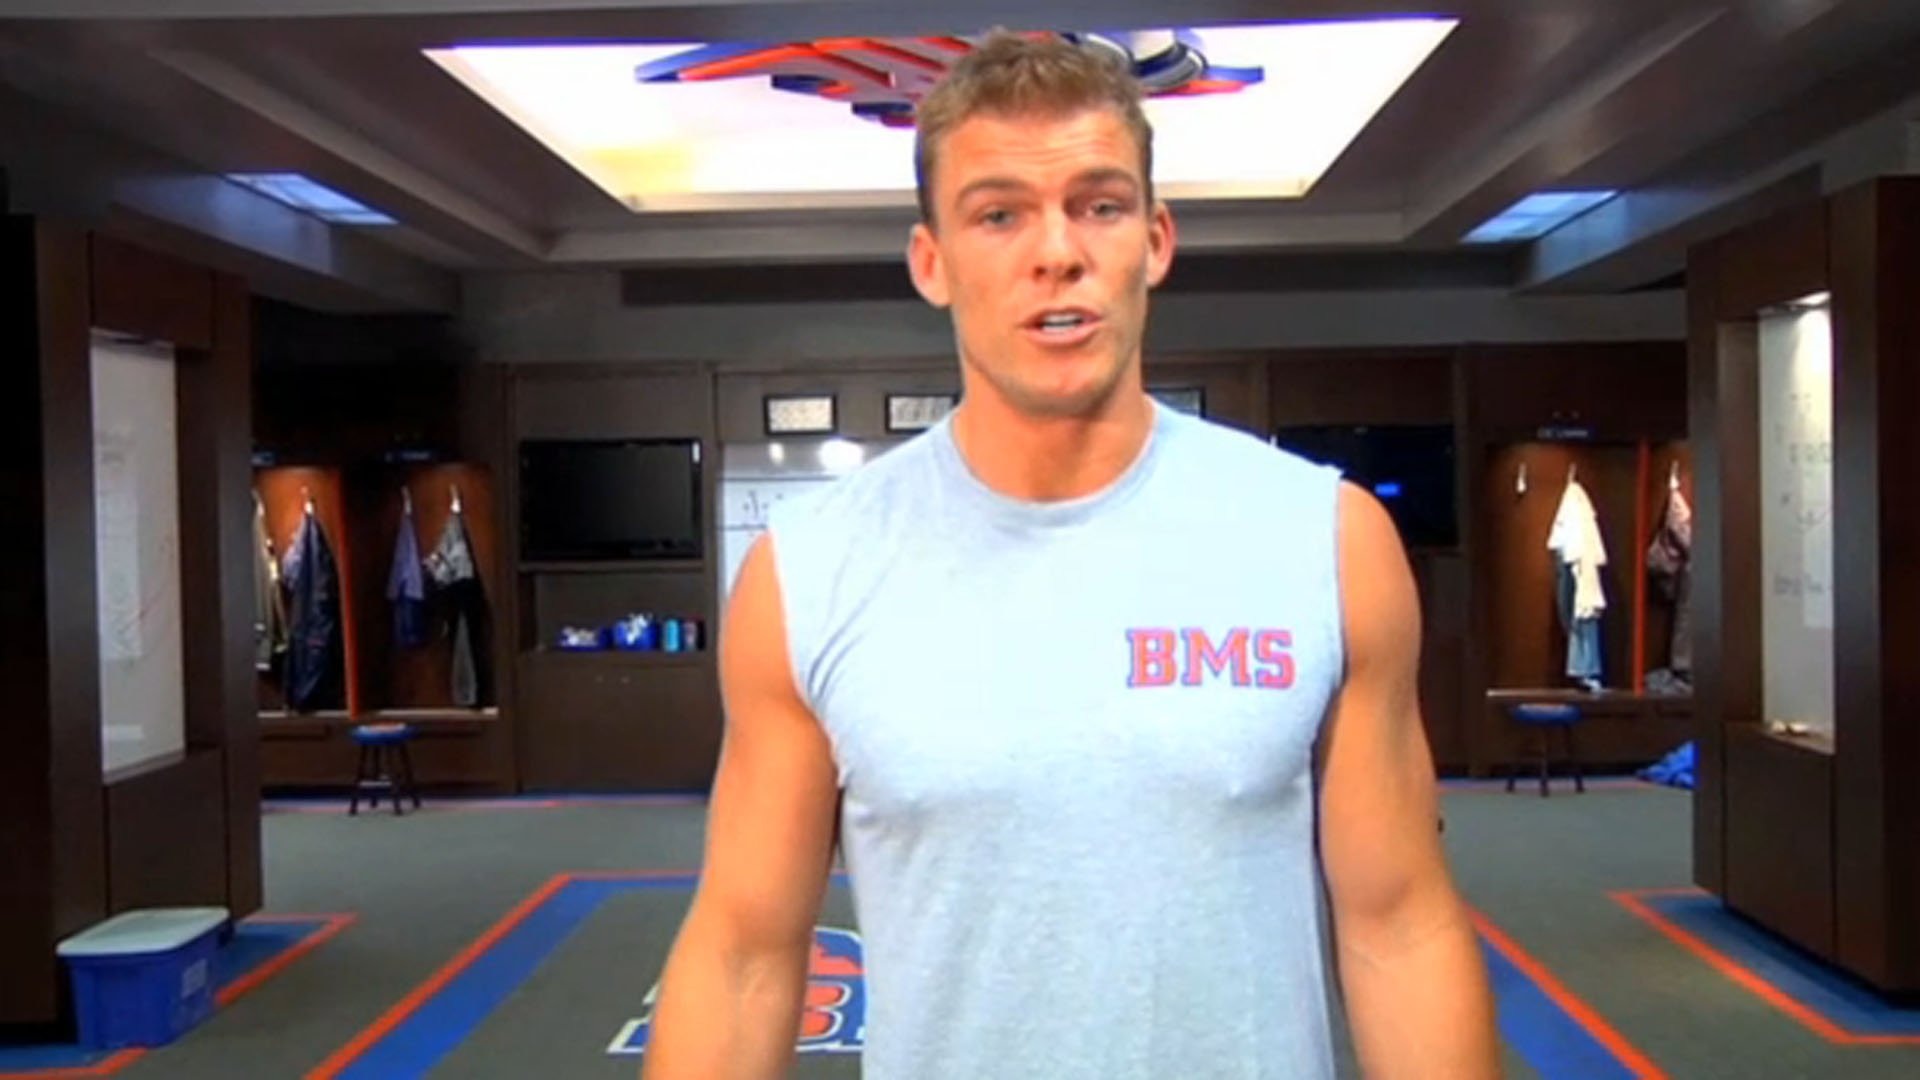 #Blue Mountain State: Sequel to Football Comedy Being Shopped with Alan Ritchson (Reacher)